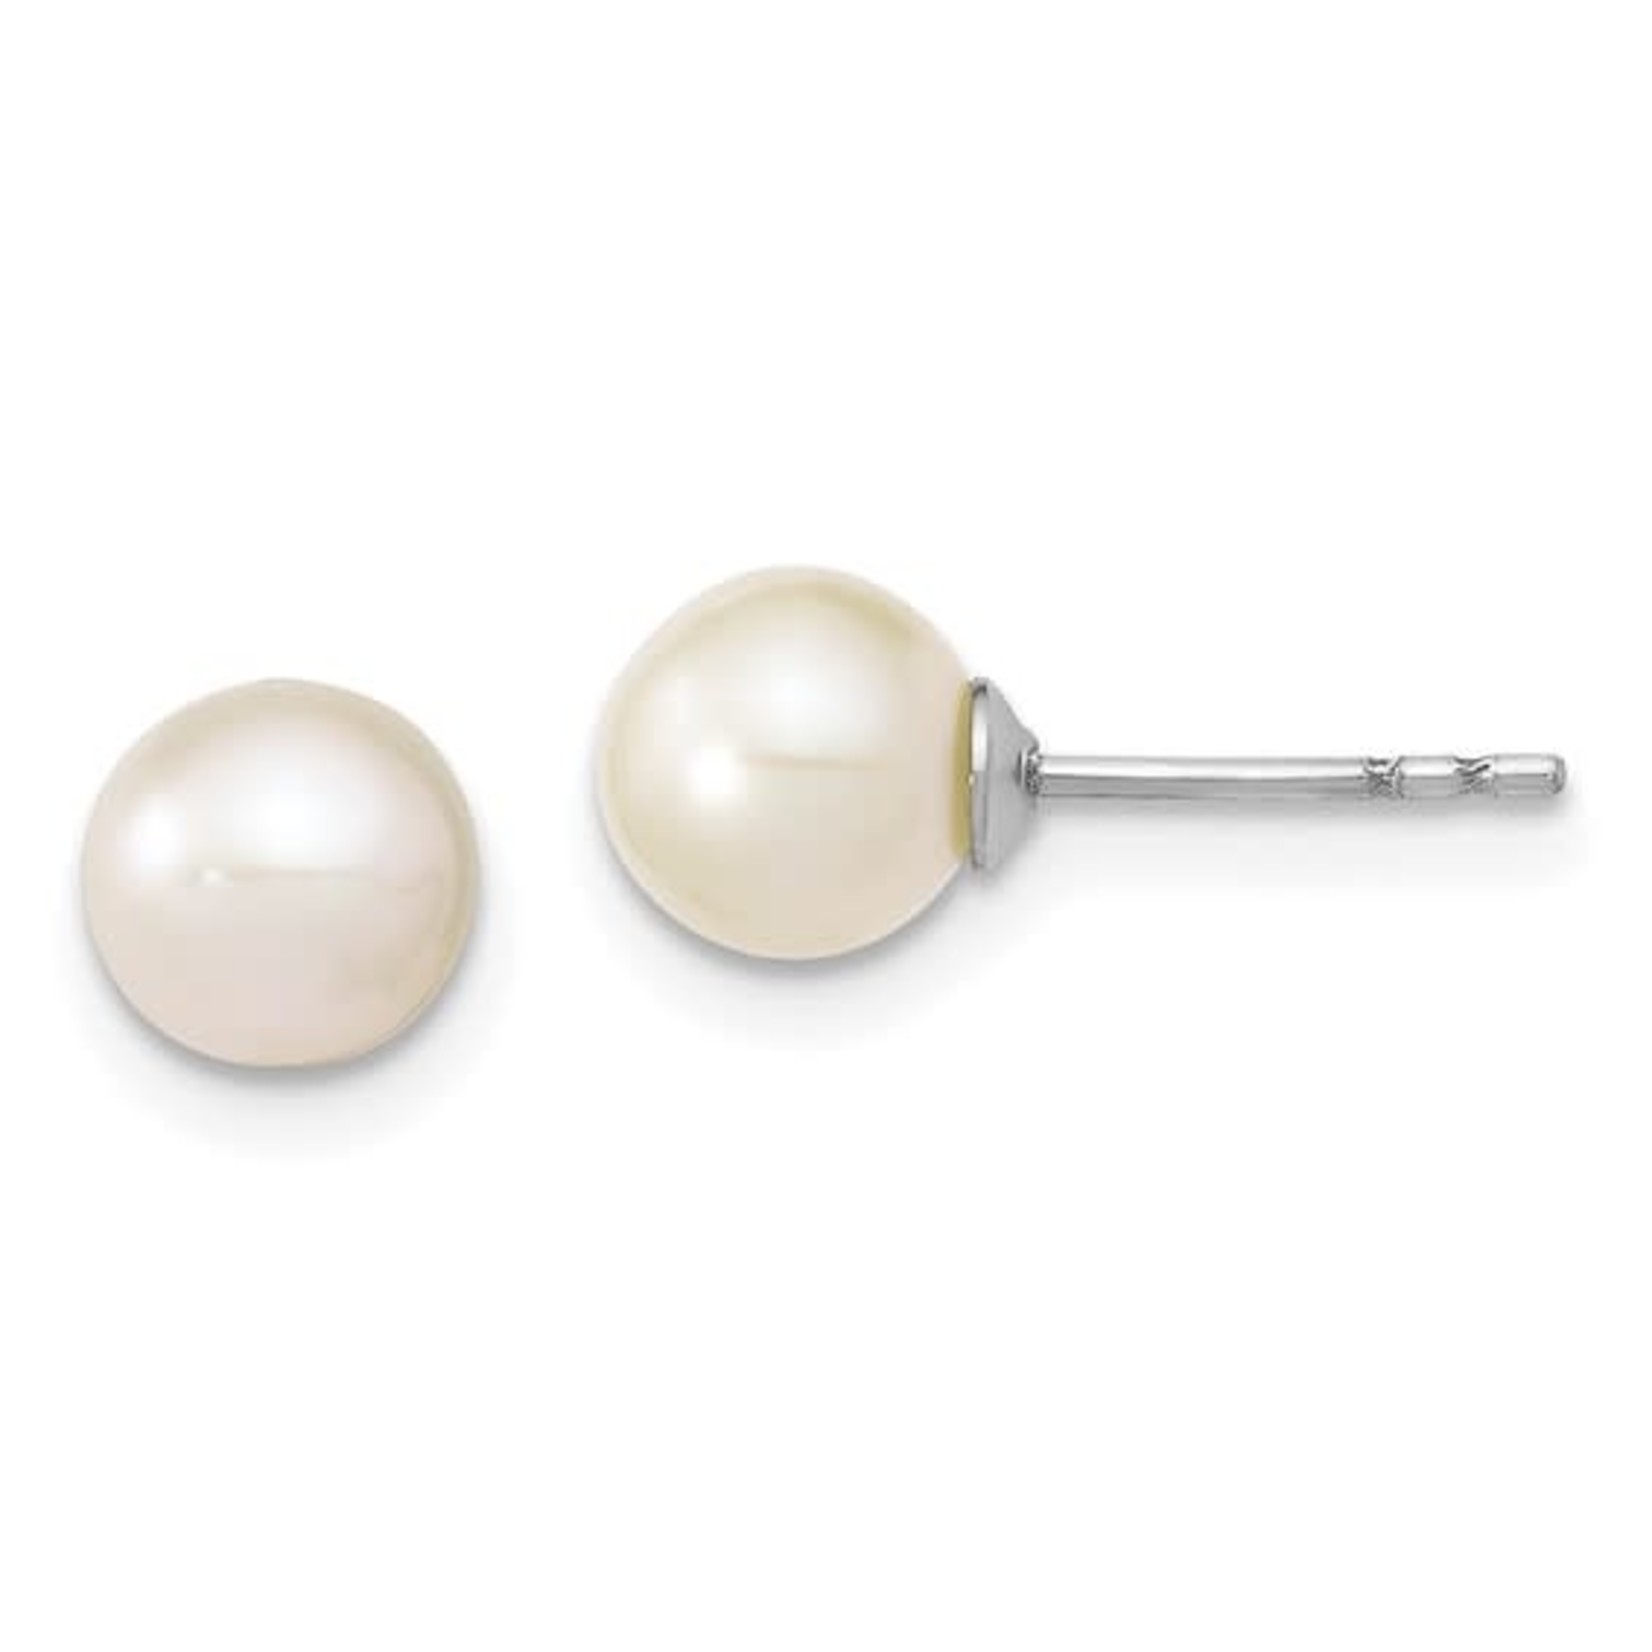 This Is Life White Round Freshwater Cultured Pearl Post Earrings - 6-7mm Sterling Silver